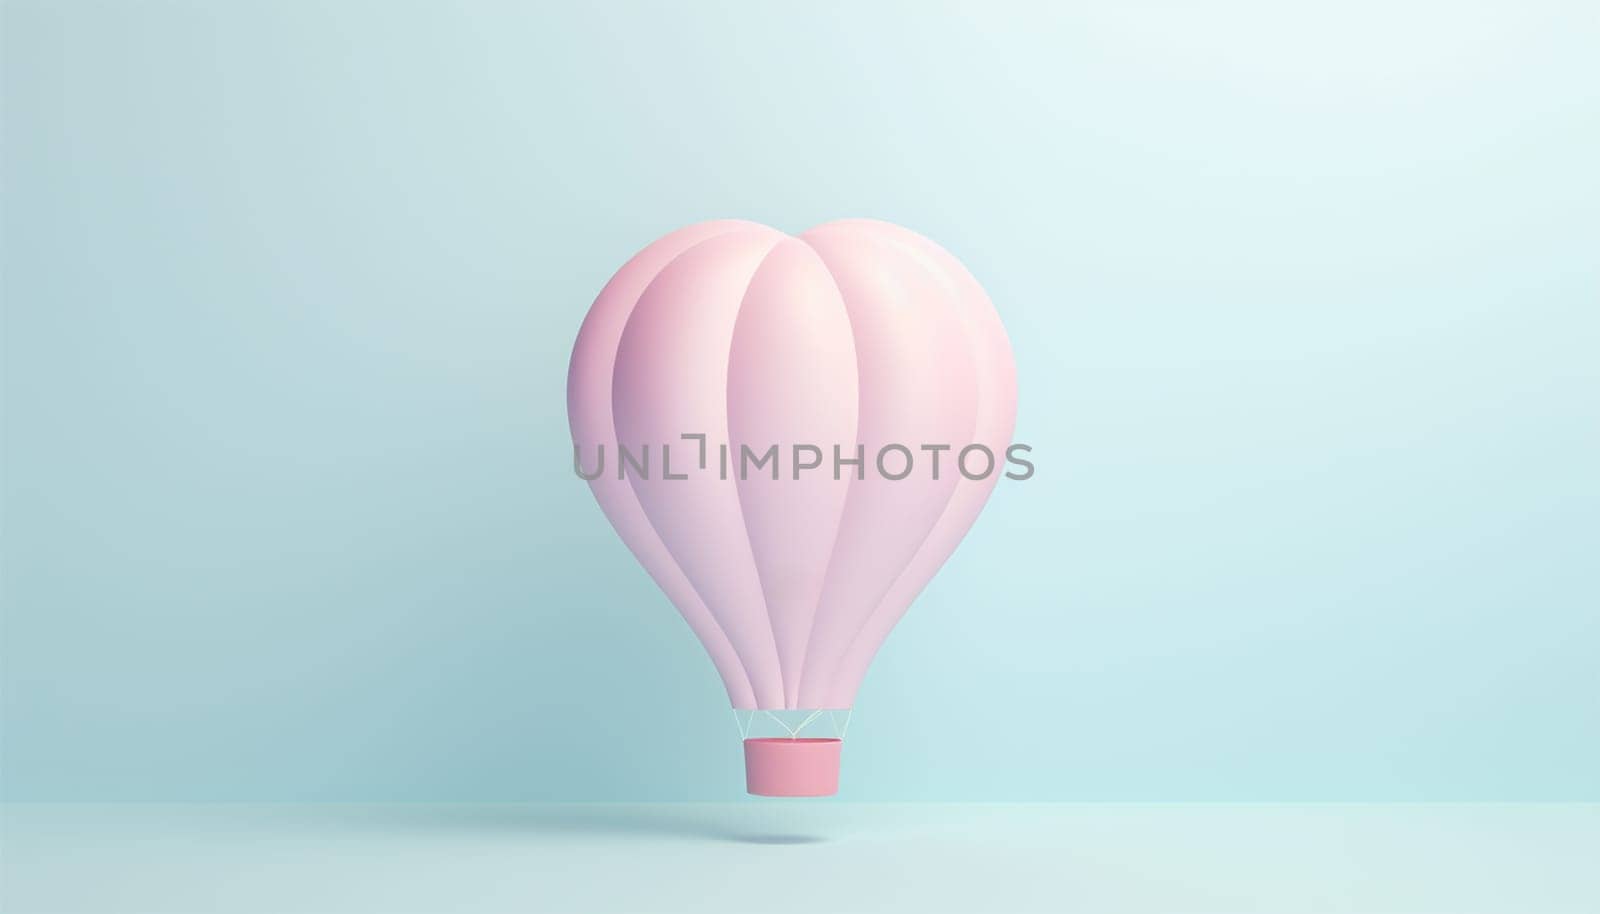 Cute pastel hot air balloon flying in the air. Design illustration of scene with hot air balloons float up in the sky on 3D paper art style. Hot air balloon float up in the sky. pastel paper cut and craft style., illustration. Pink,purple and blue color Copy space by Annebel146